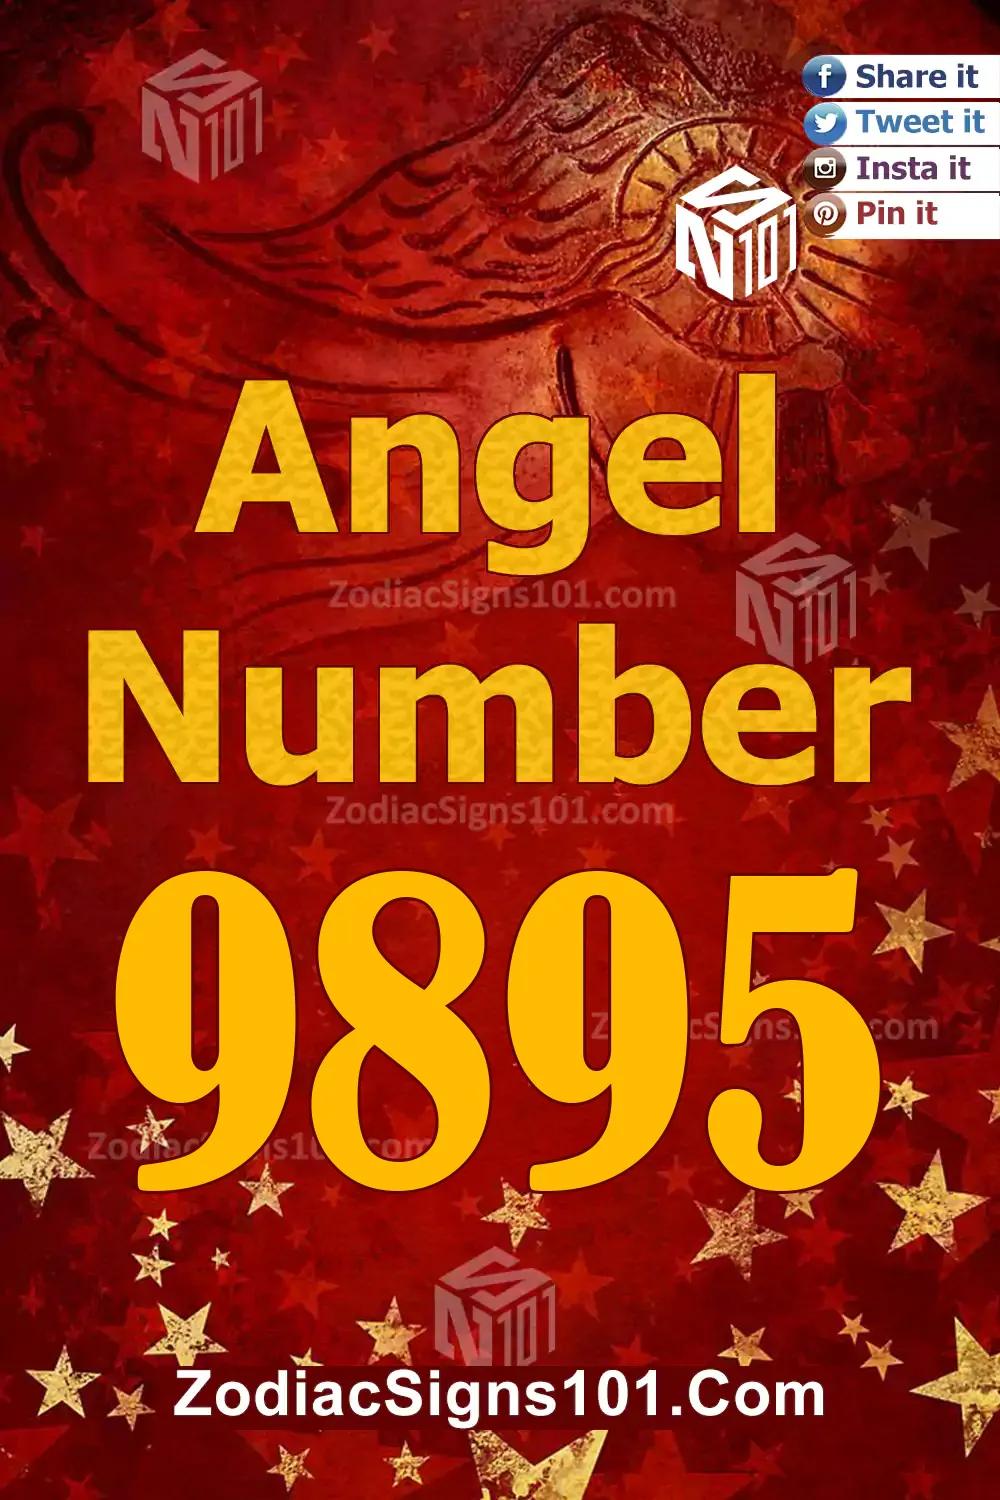 9895 Angel Number Meaning